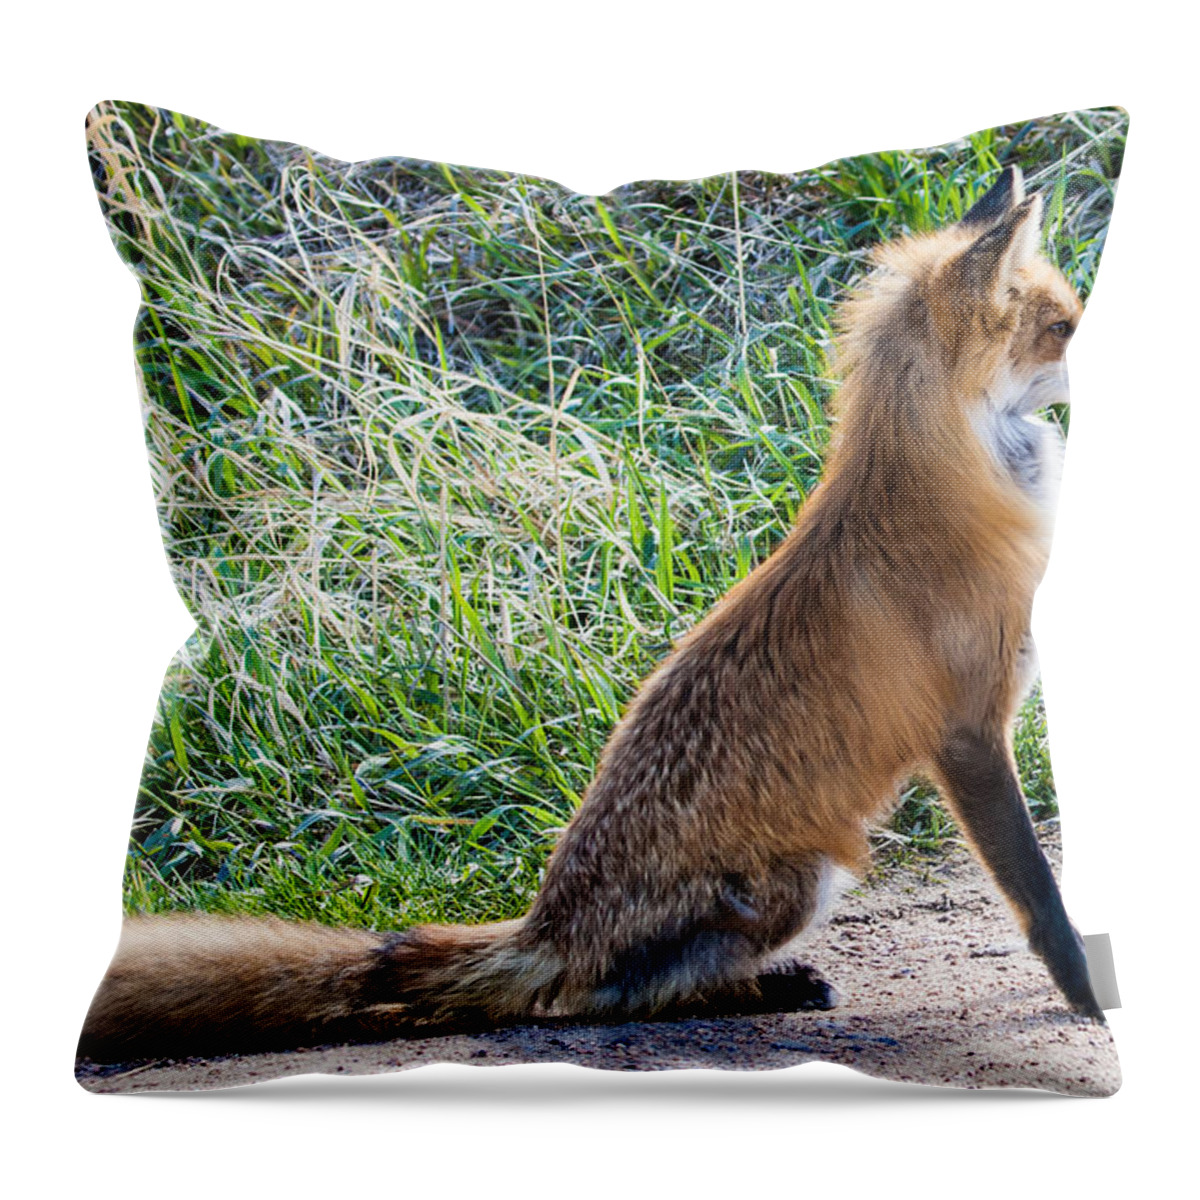 Red Fox Throw Pillow featuring the photograph The Lookout by Mindy Musick King